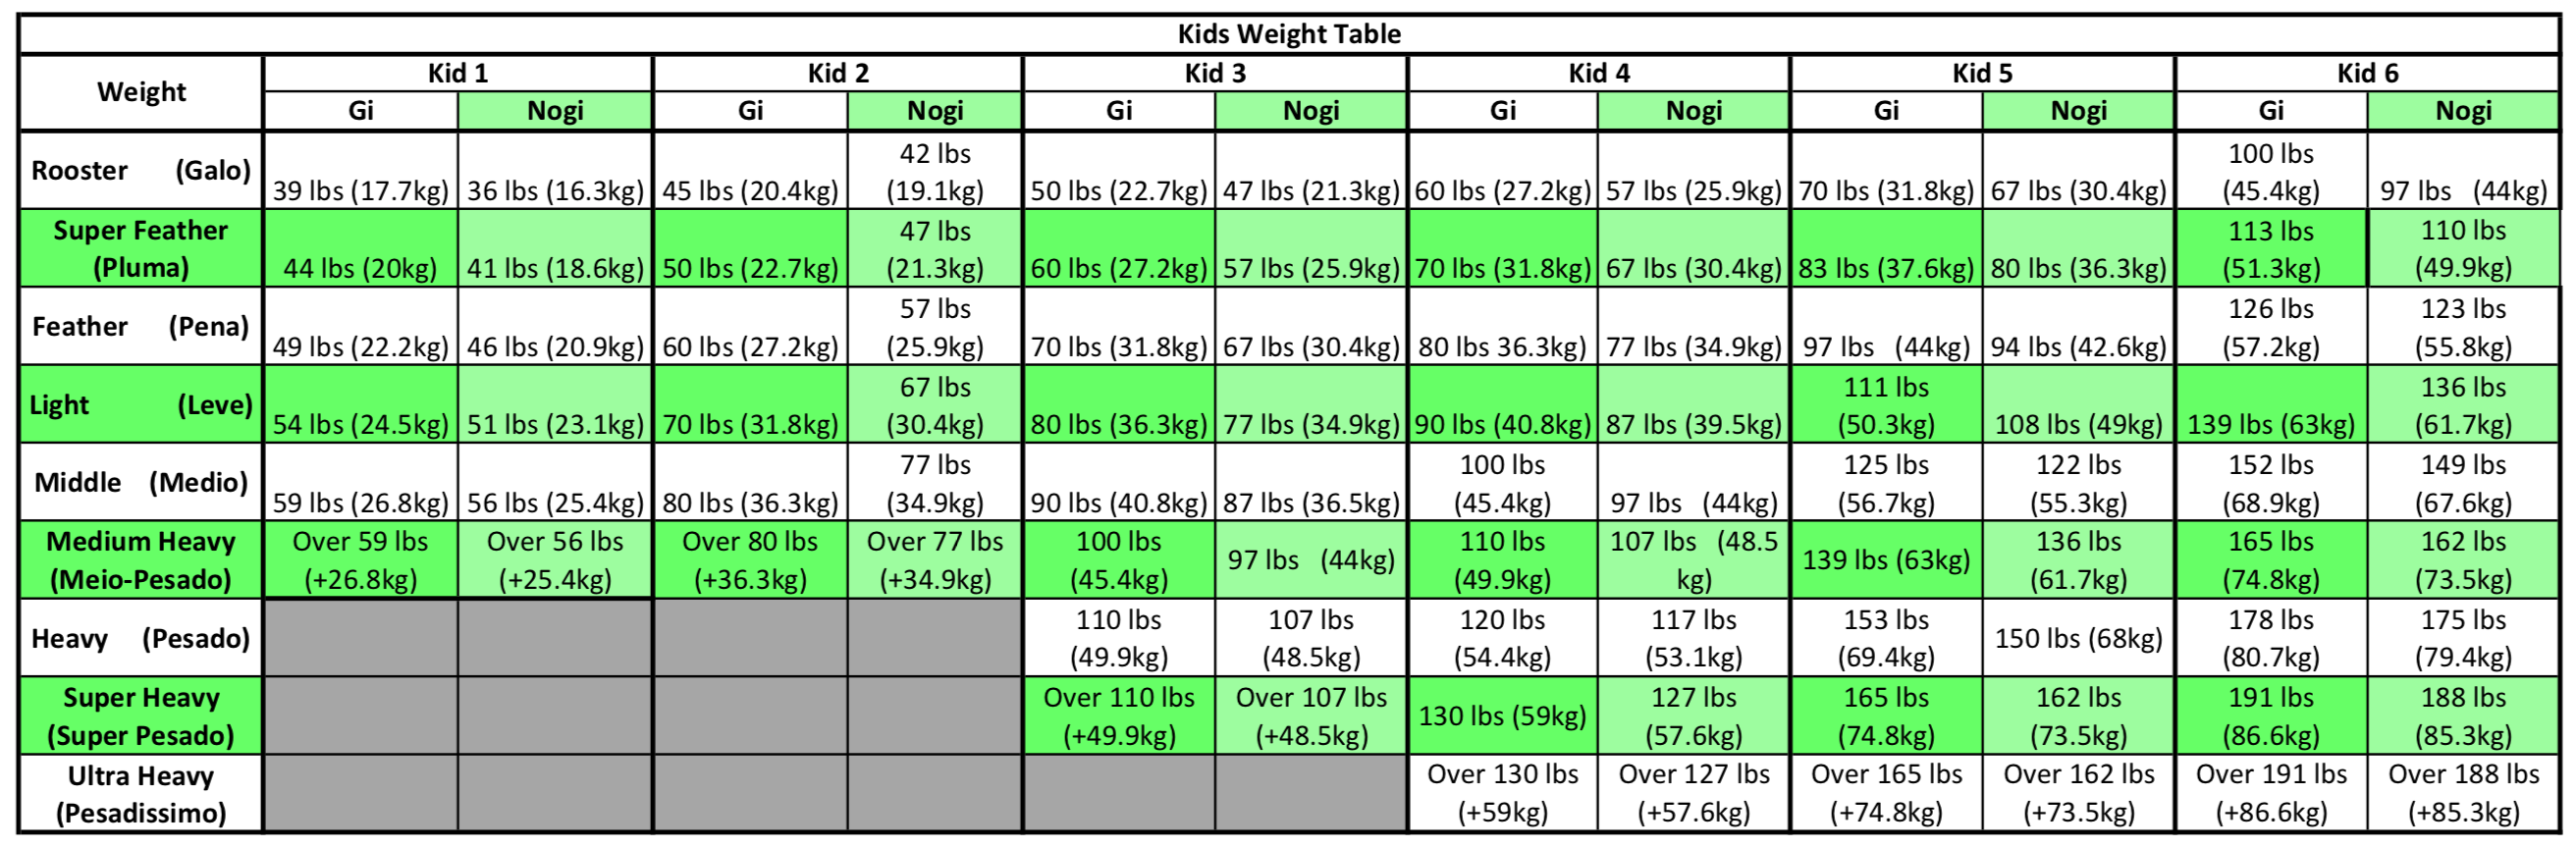 Juvenile, Adult, and Master Weight Divisions for Men and Women in GI and No...